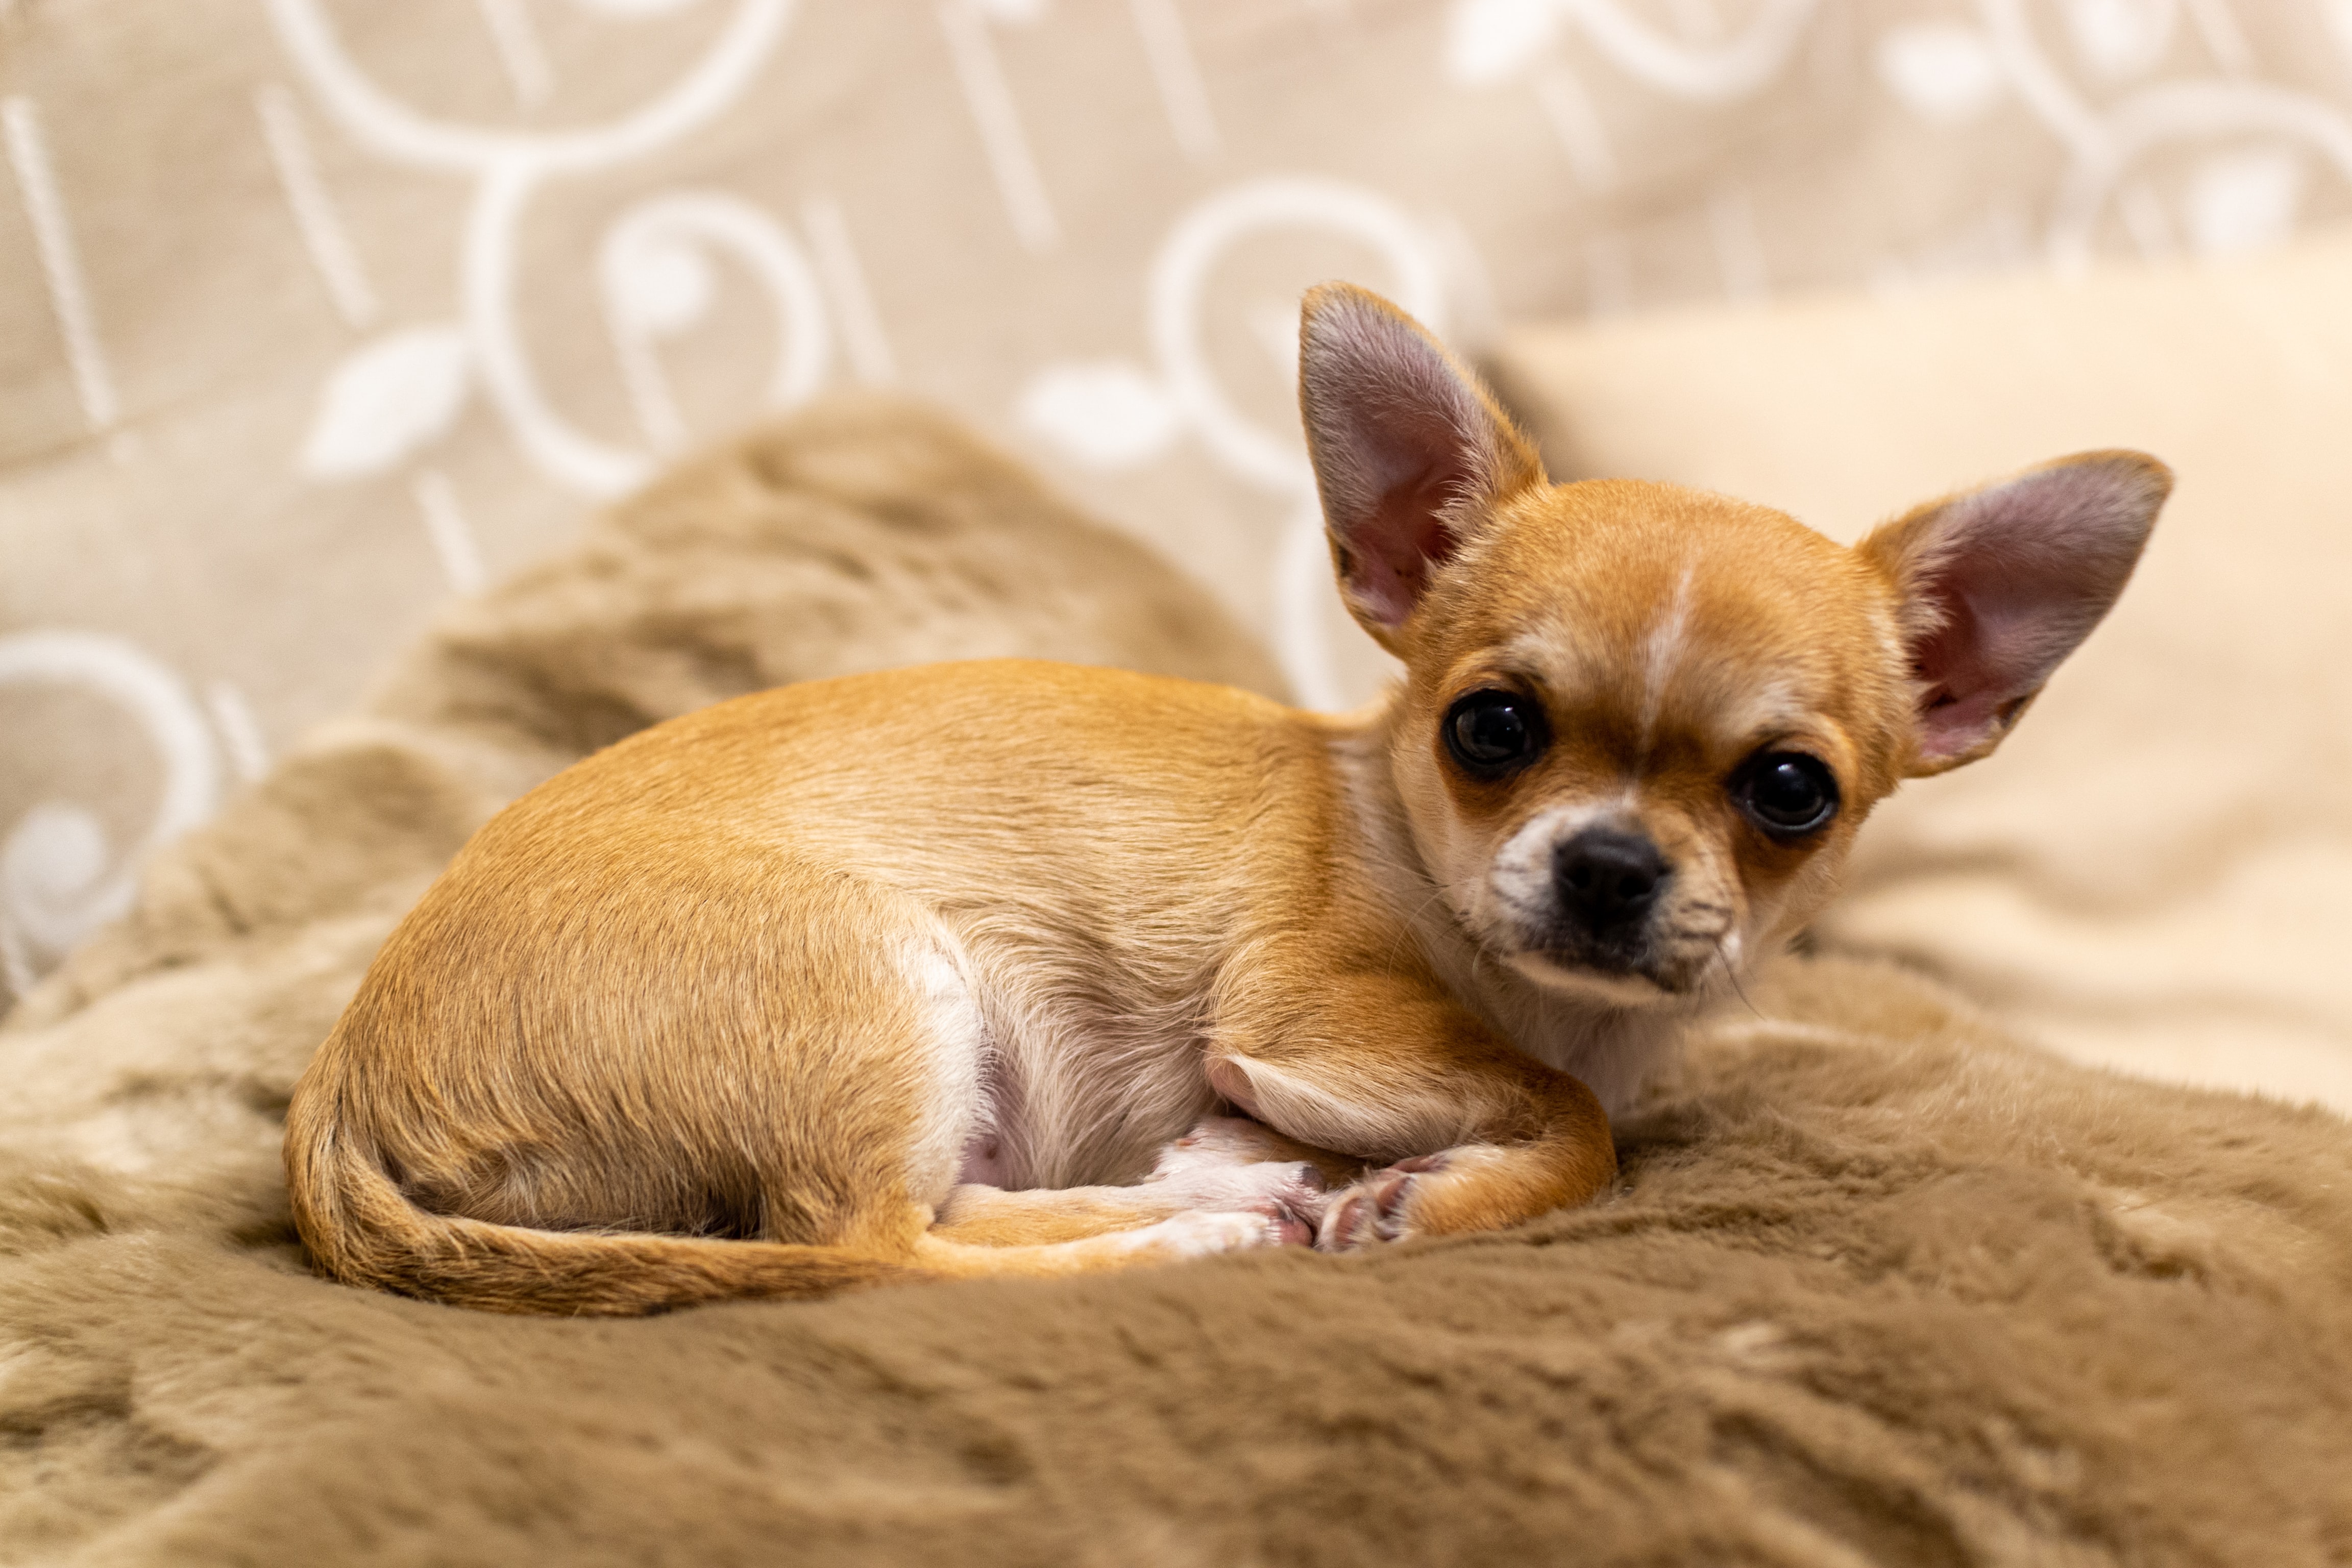 Chihuahuas for Small Children: Are They Good as Pets?